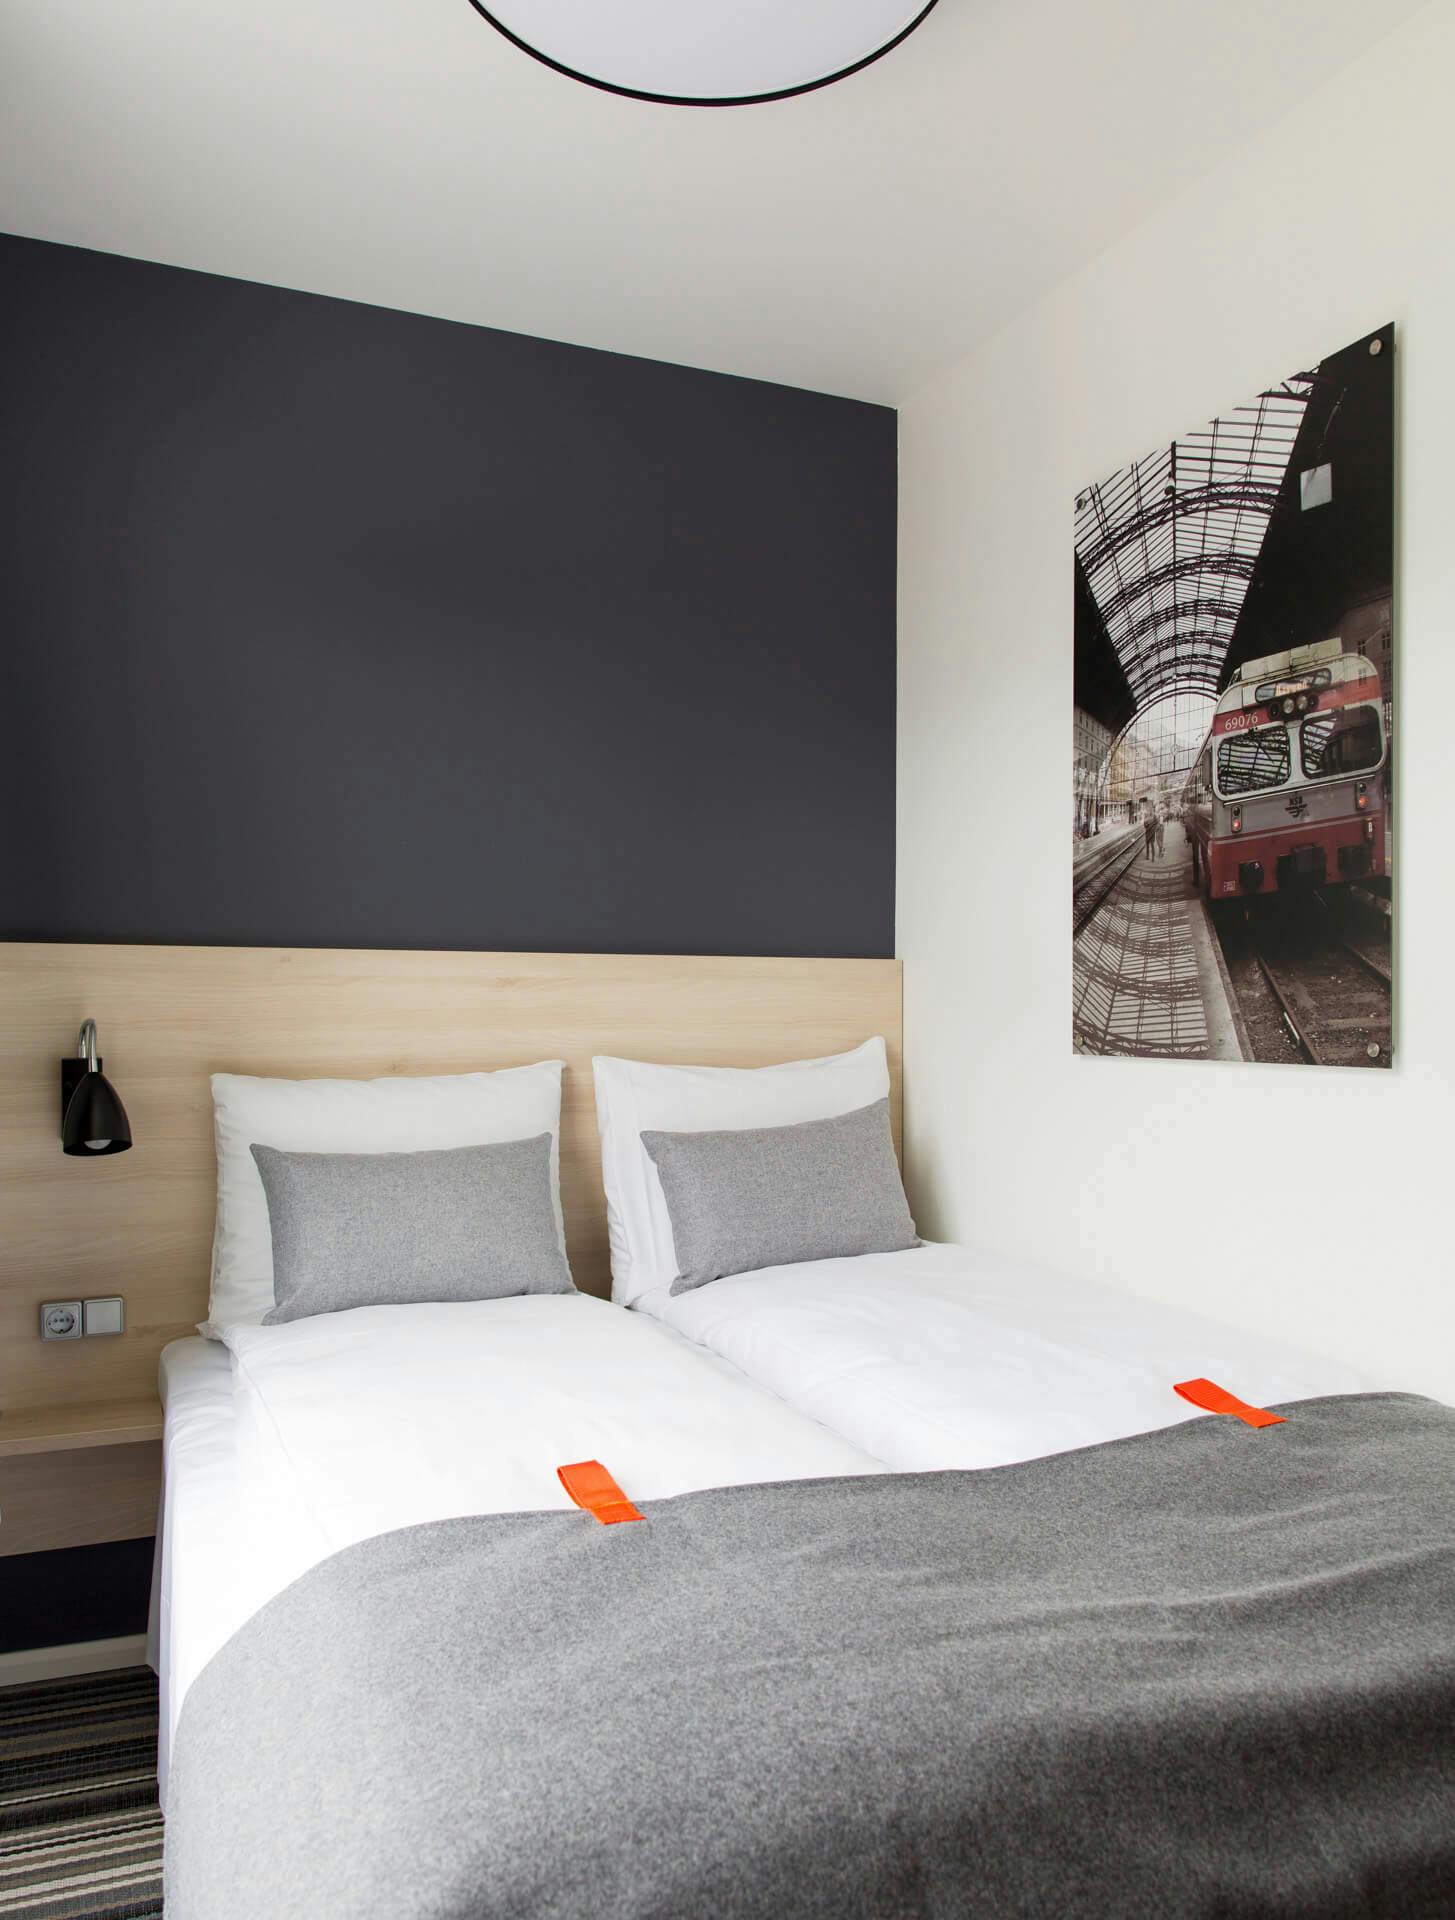 Image of a room with a double bed, reading lamp and a picture on the wall